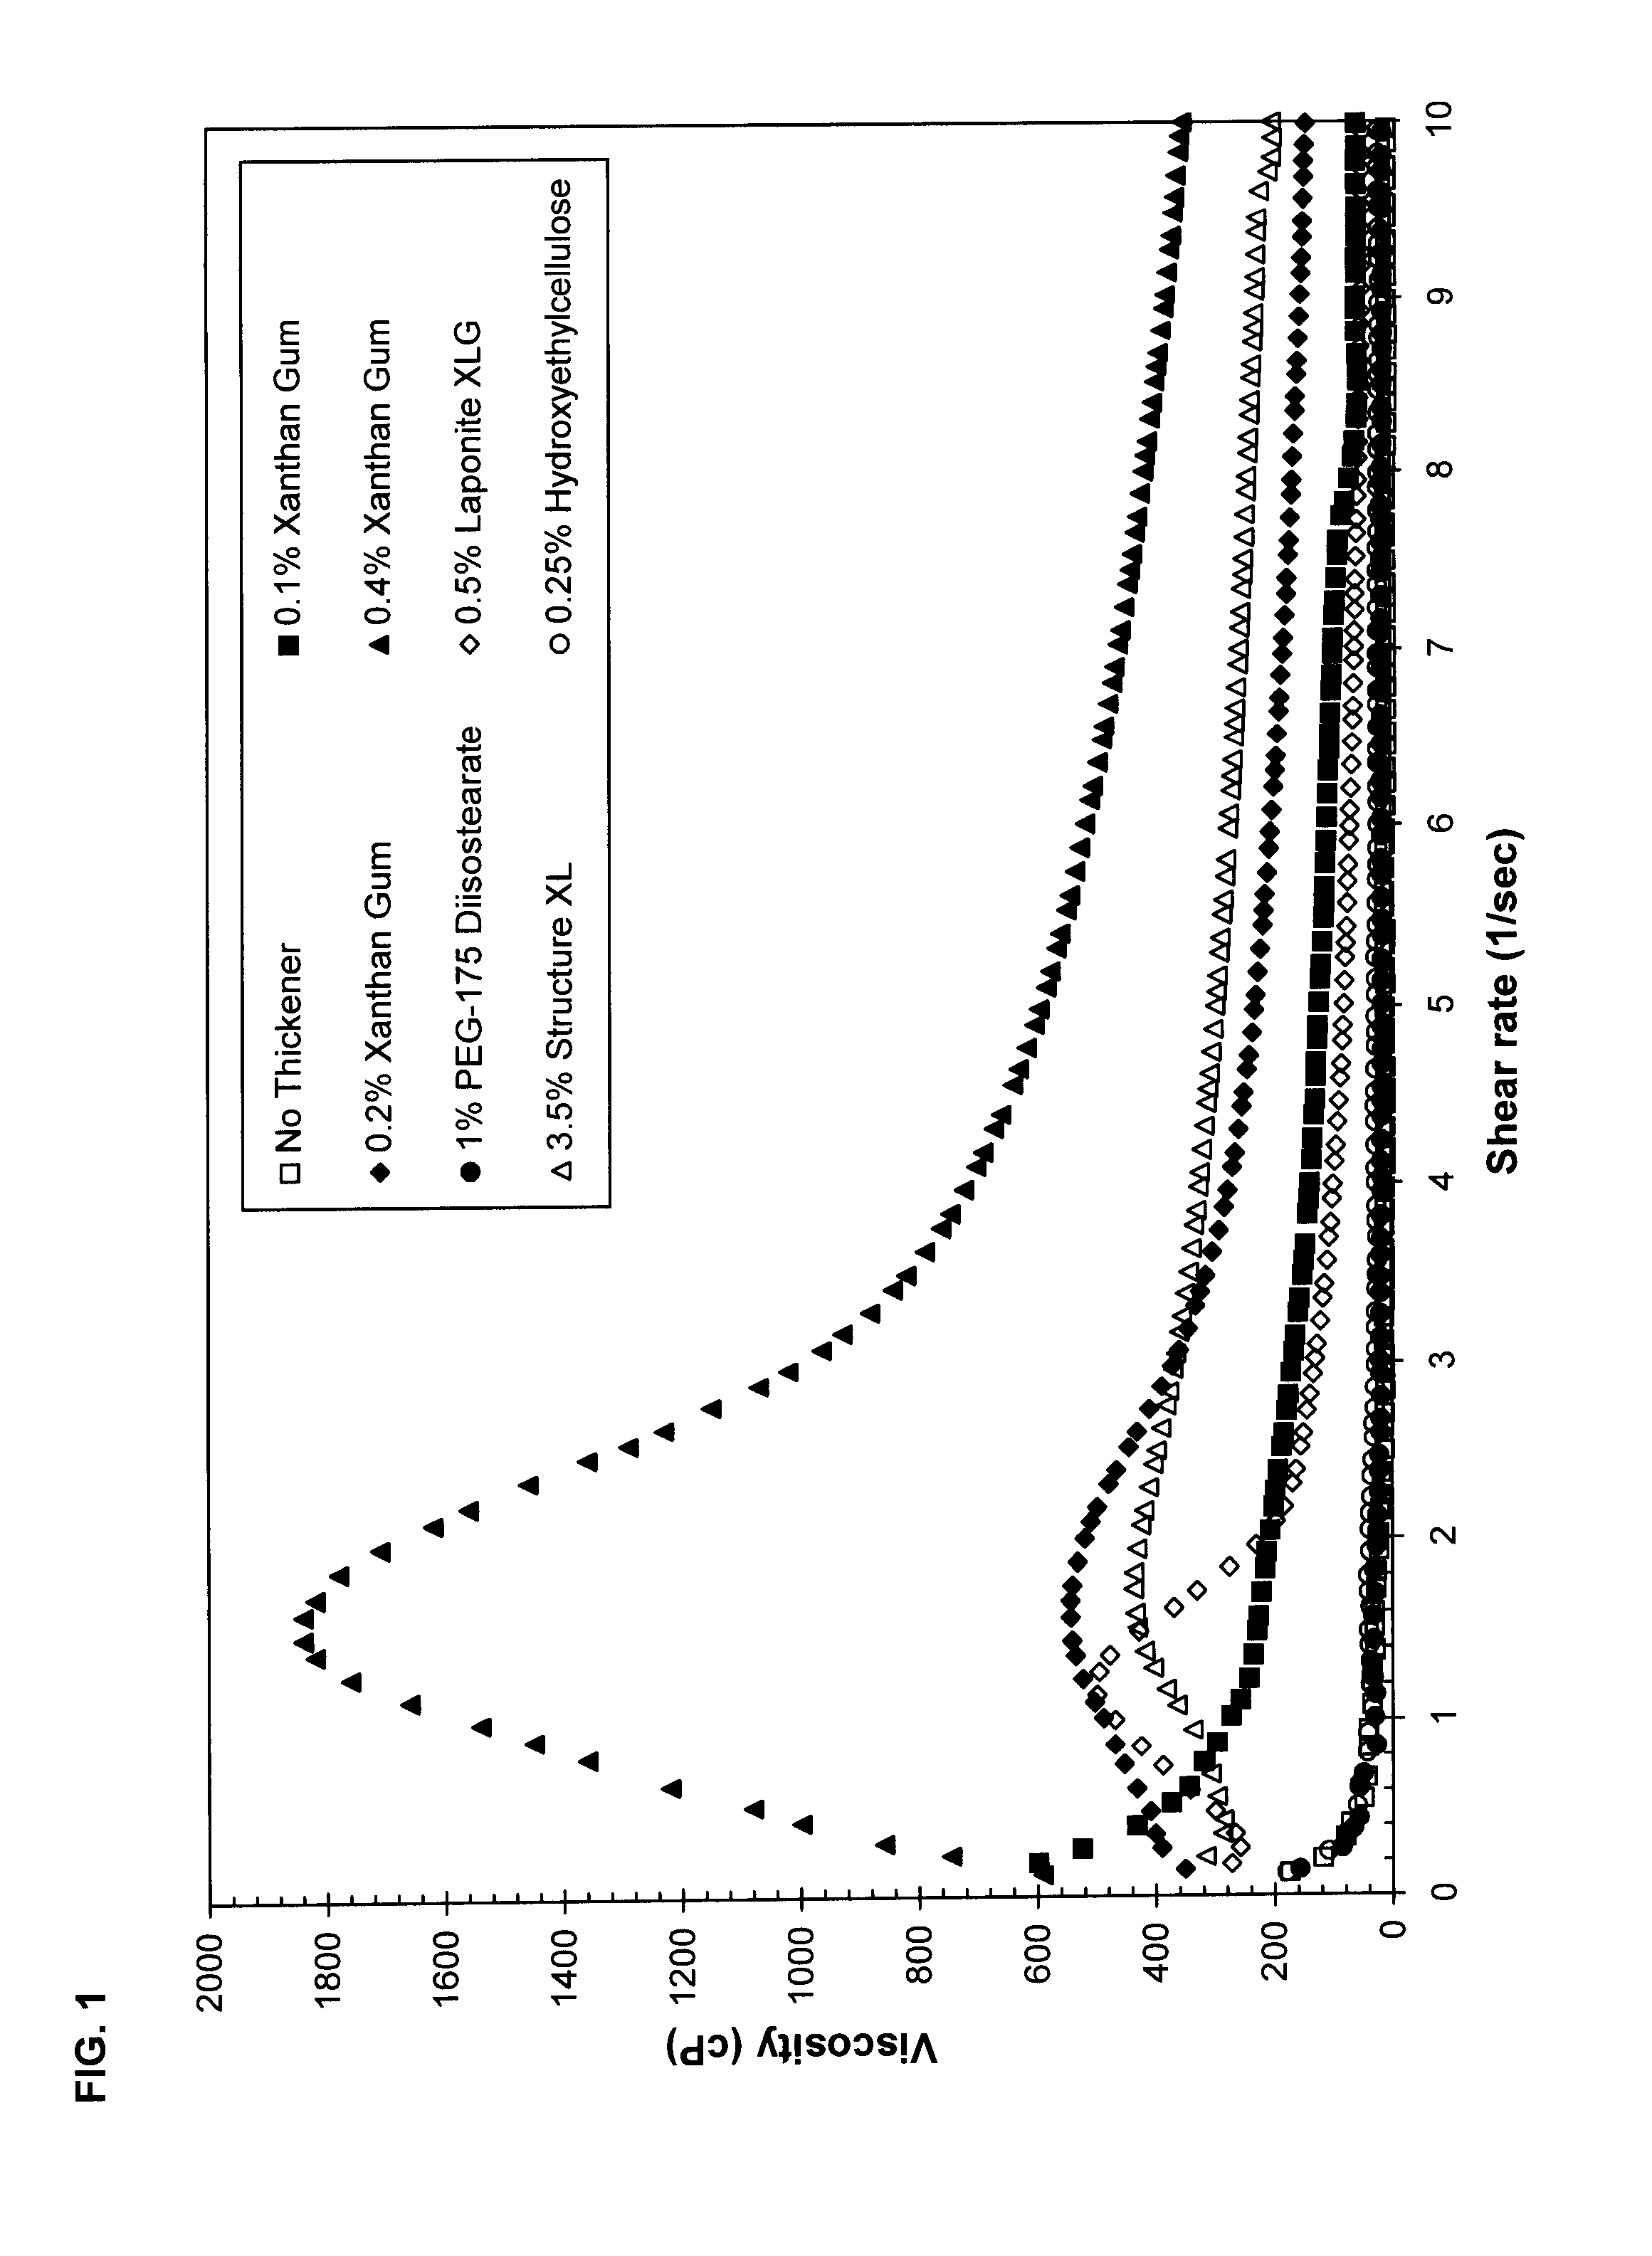 Stain-discharging and removing system